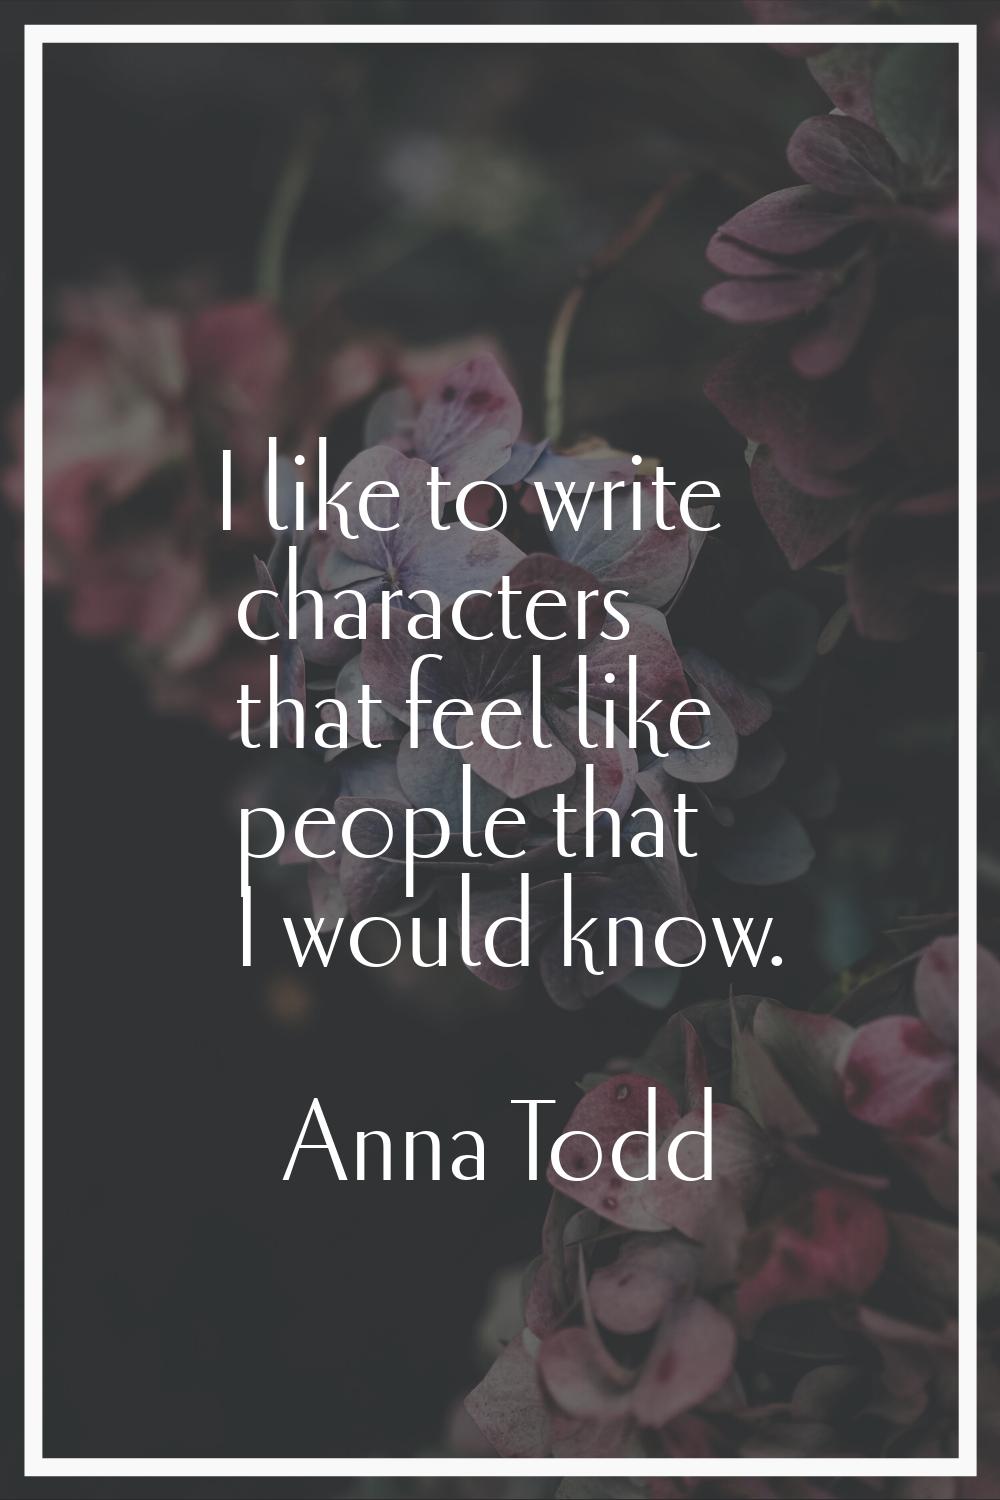 I like to write characters that feel like people that I would know.